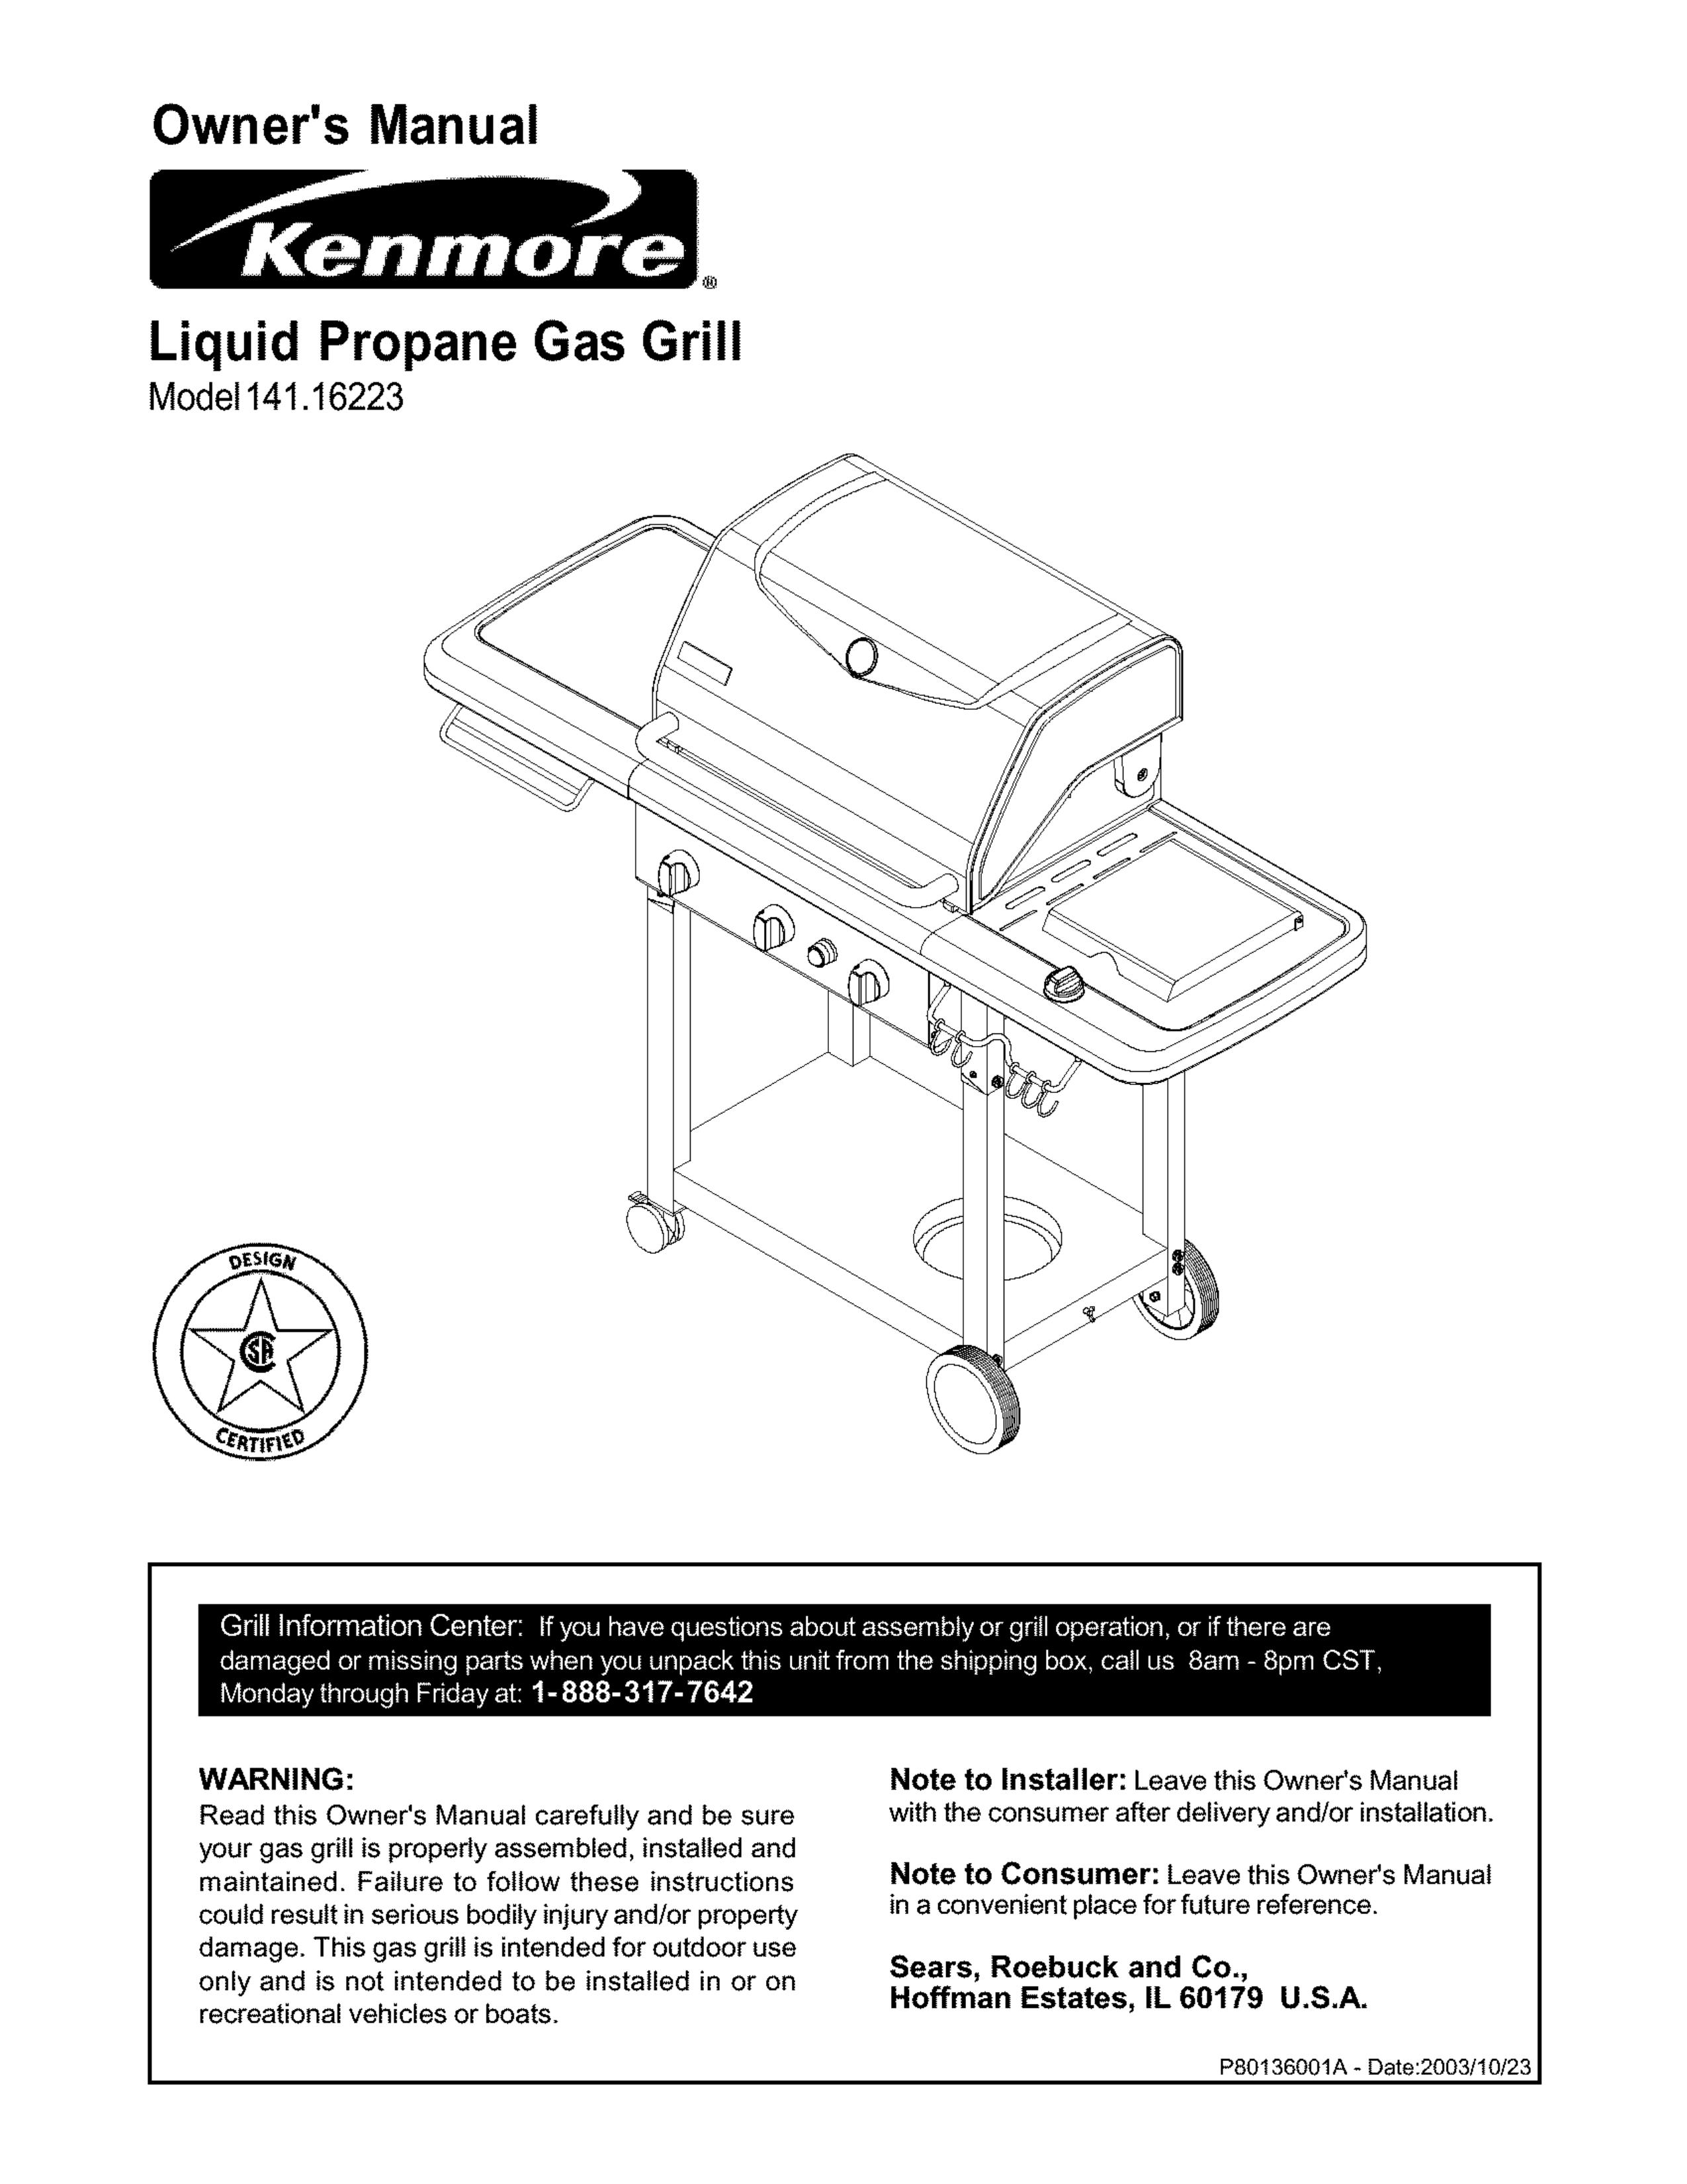 Kenmore 141.16223 Gas Grill User Manual